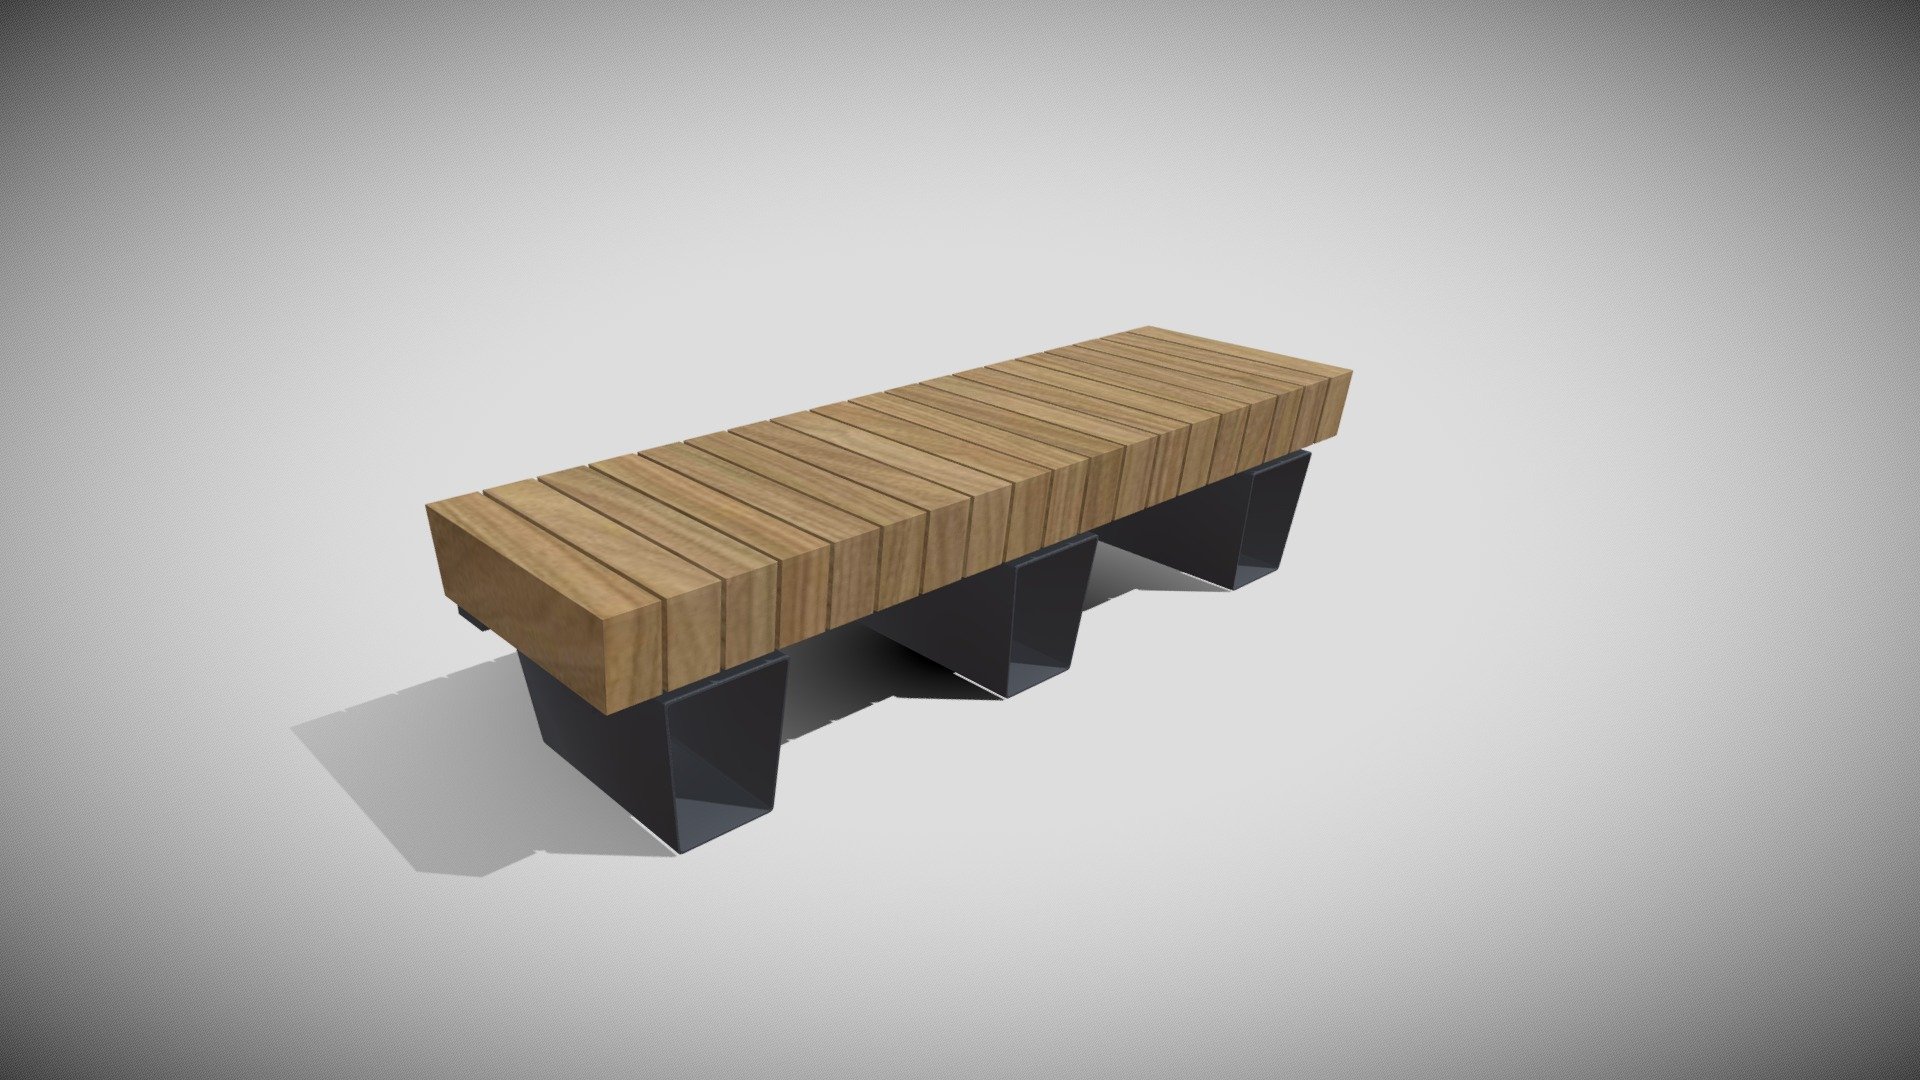 Detailed model of a Park Bench, modeled in Cinema 4D.The model was created using approximate real world dimensions.

The model has 15,692 polys and 15,042 vertices.

An additional file has been provided containing the original Cinema 4D project file, textures and other 3d export files such as 3ds, fbx and obj 3d model